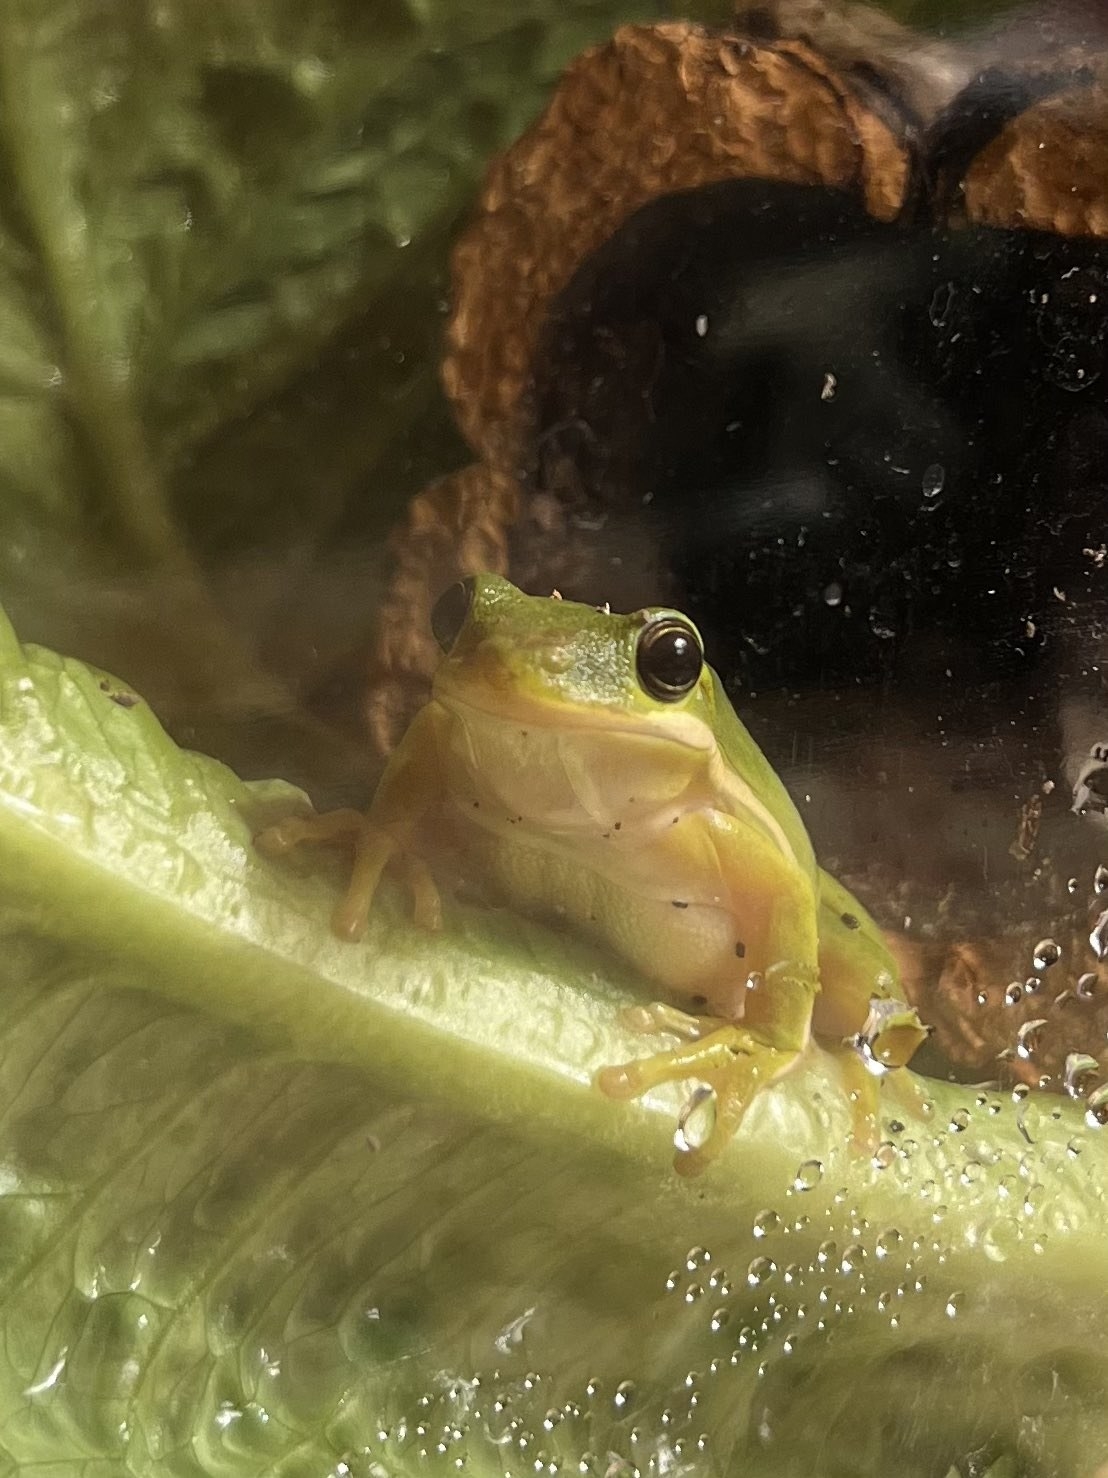 A closeup of Tony chilling on a piece of lettuce